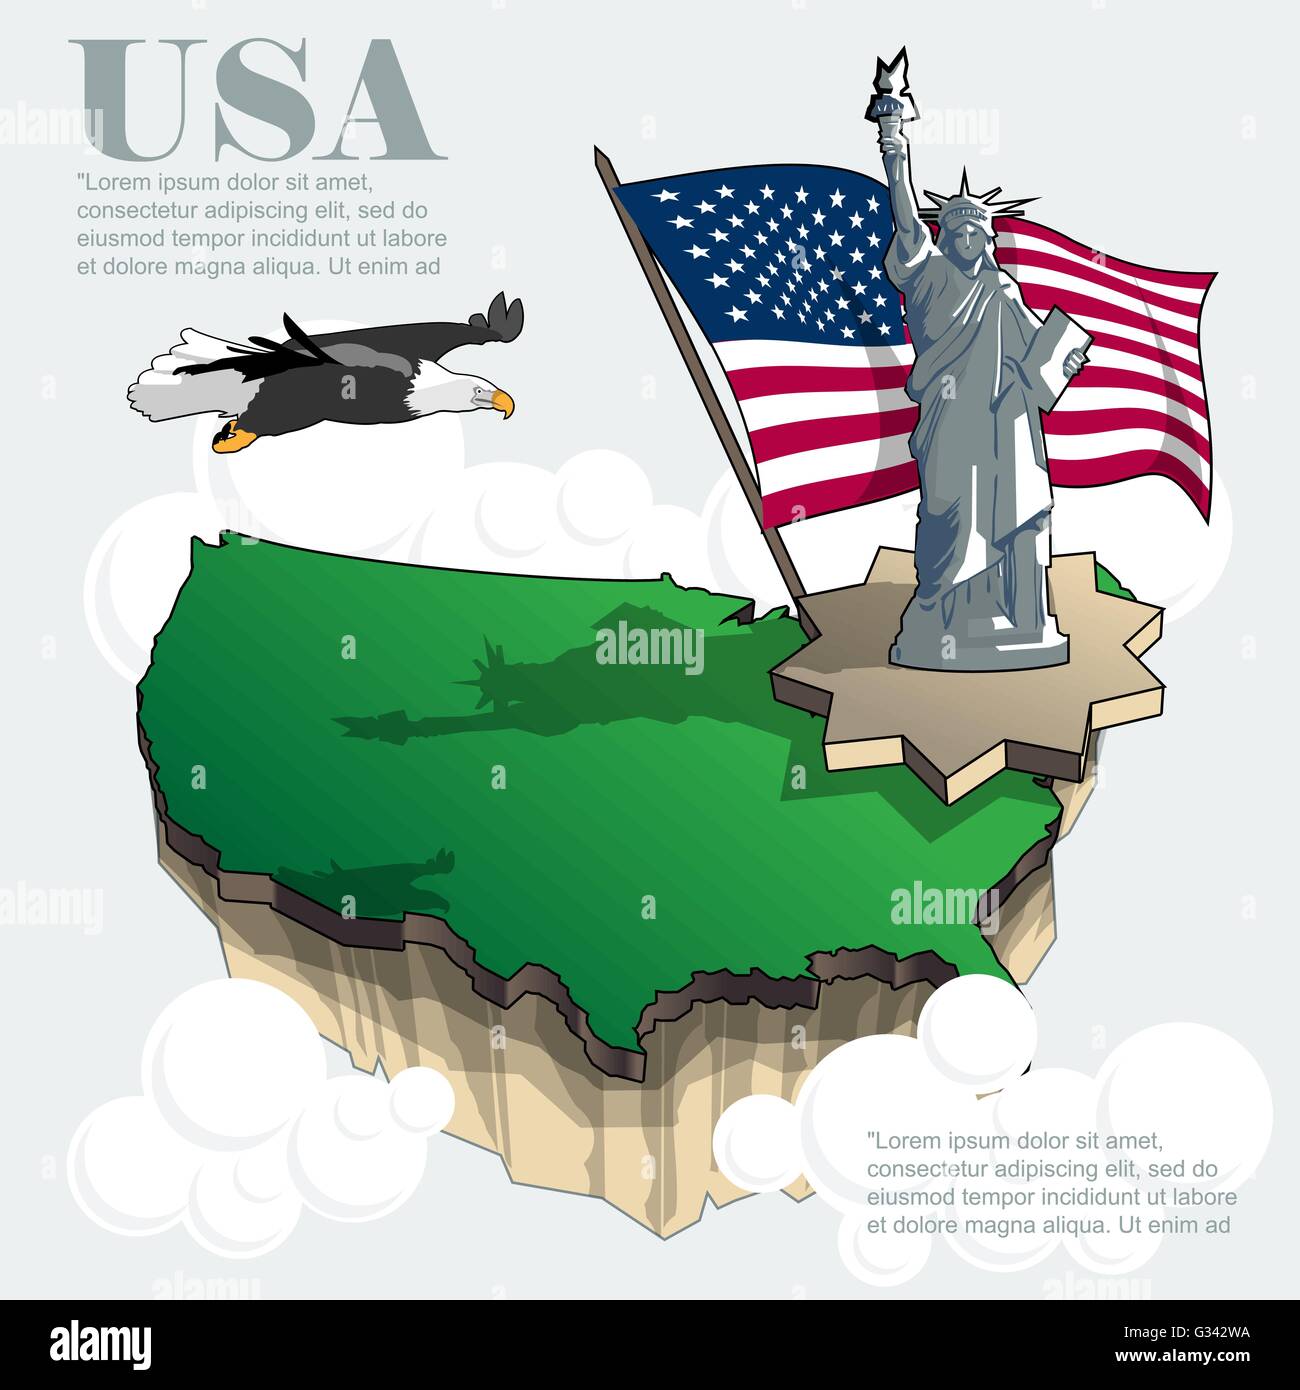 Usa country infographic map in 3d with country shape flying in the sky with clouds, big flag, liberty statue and flying eagle. D Stock Vector